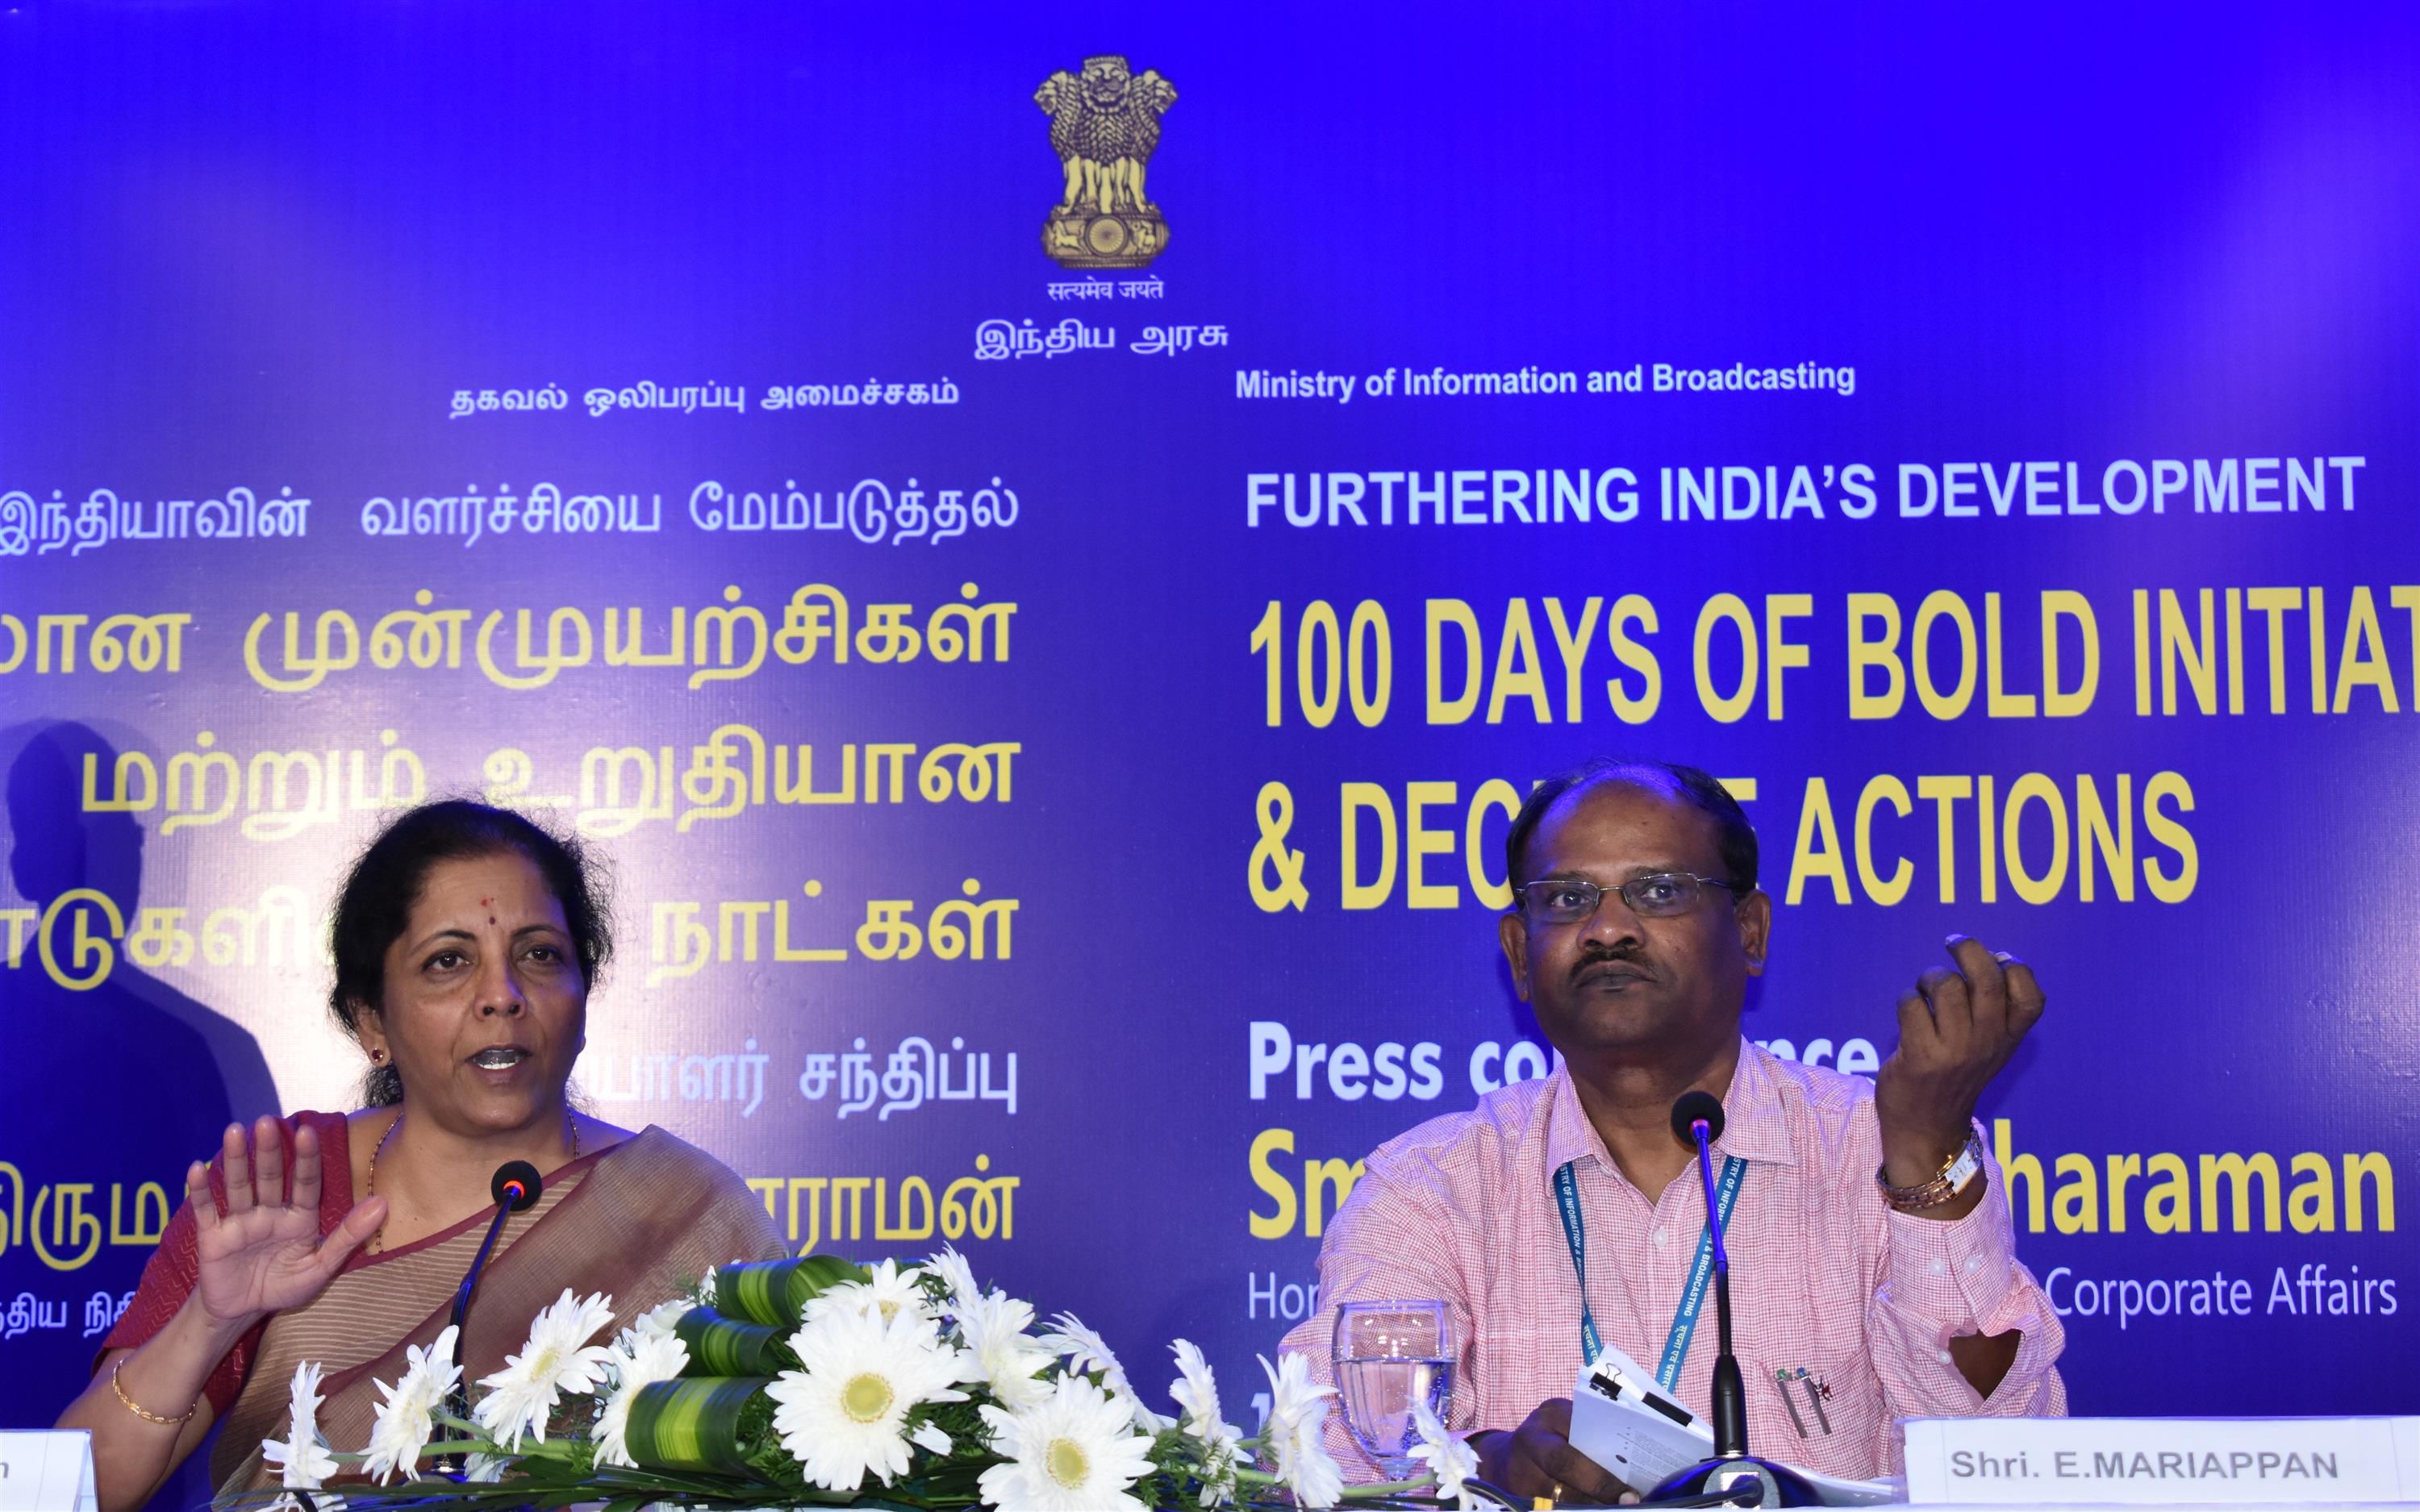 Smt. Nirmala Sitharaman, Union Minister for Finance and Corporate Affairs addressing the media on Furthering India’s Development - 100 Days of Bold Initiatives & Decisive Actions of the Government of India at Chennai today (10.09.2019)